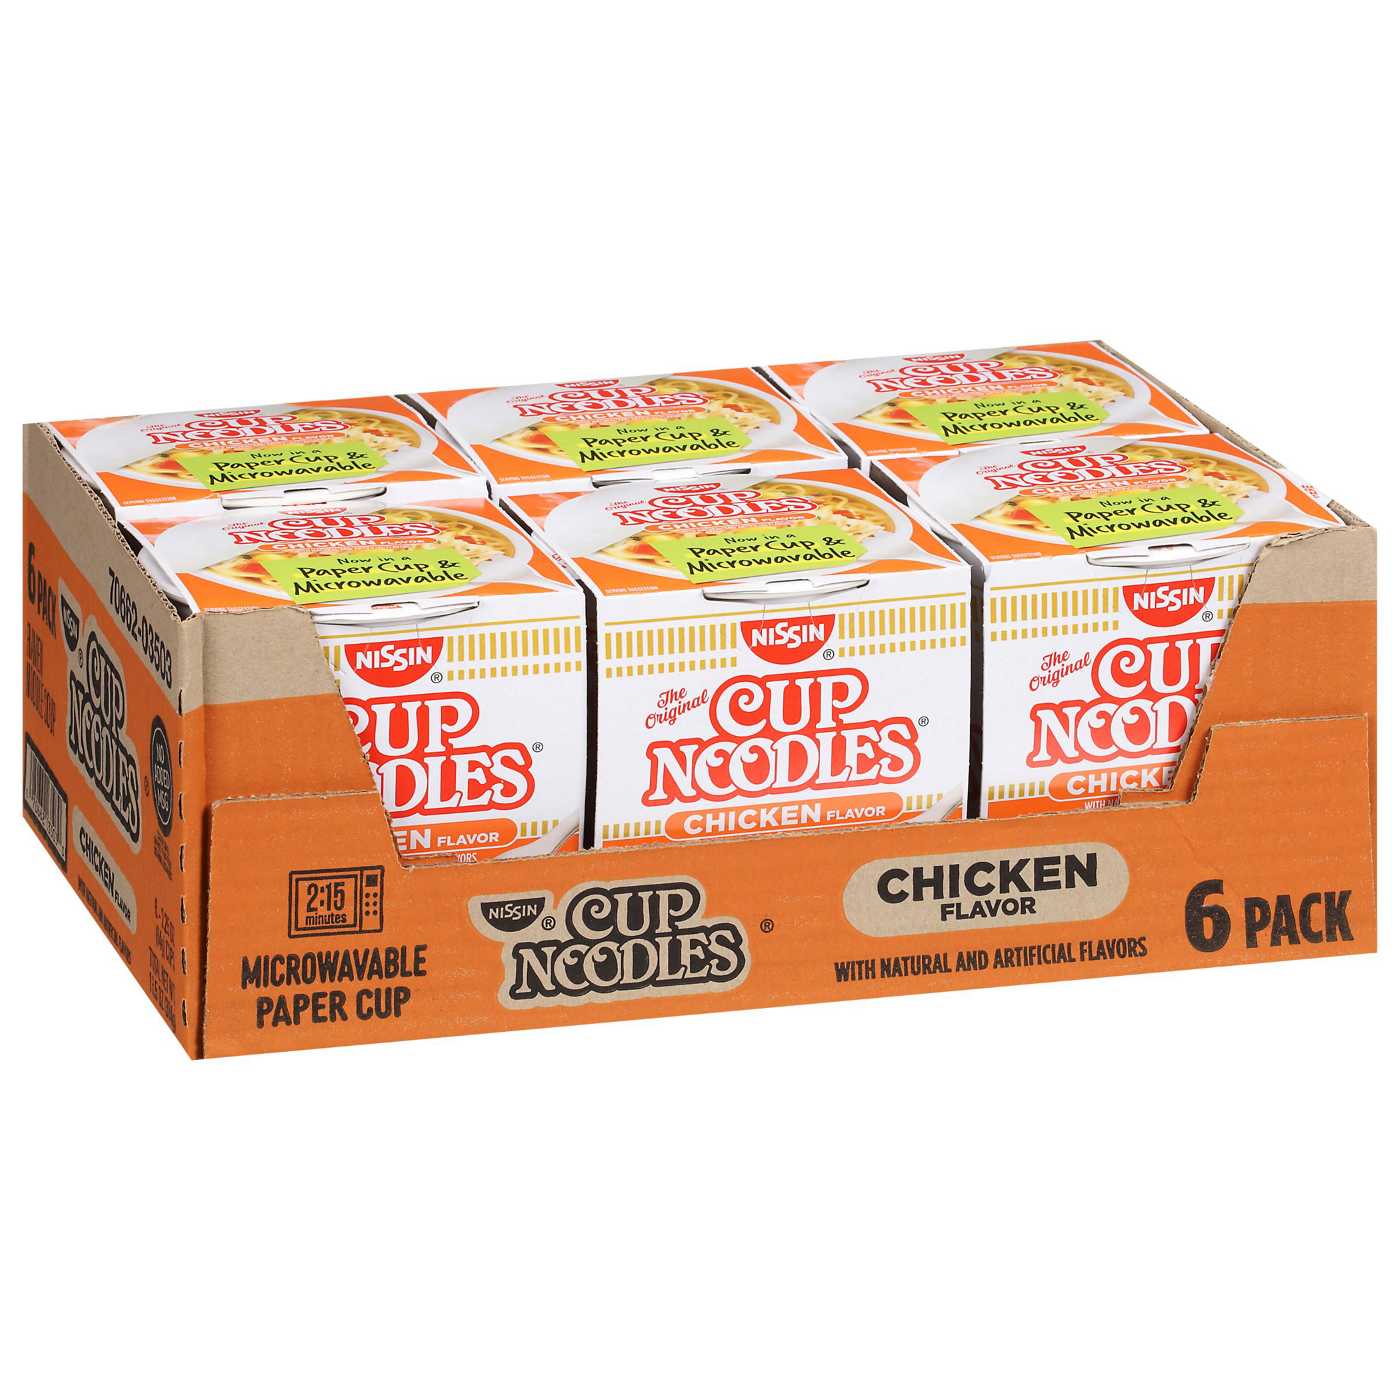 Nissin Chicken Cup Noodles Value Pack; image 3 of 5